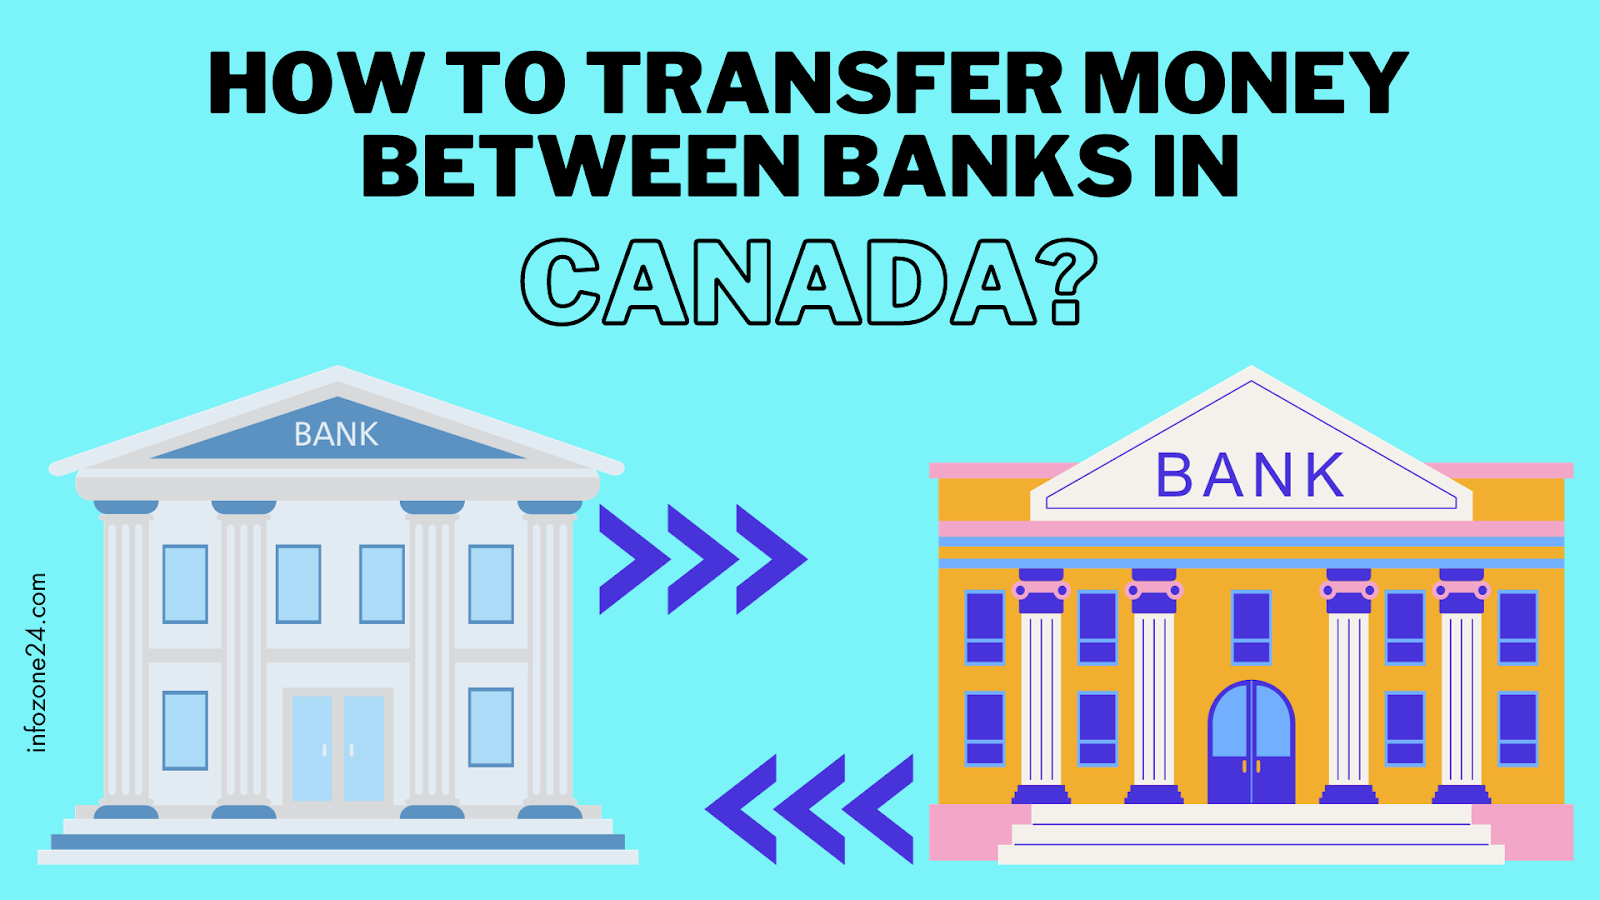 How To Transfer Money Between Banks in Canada